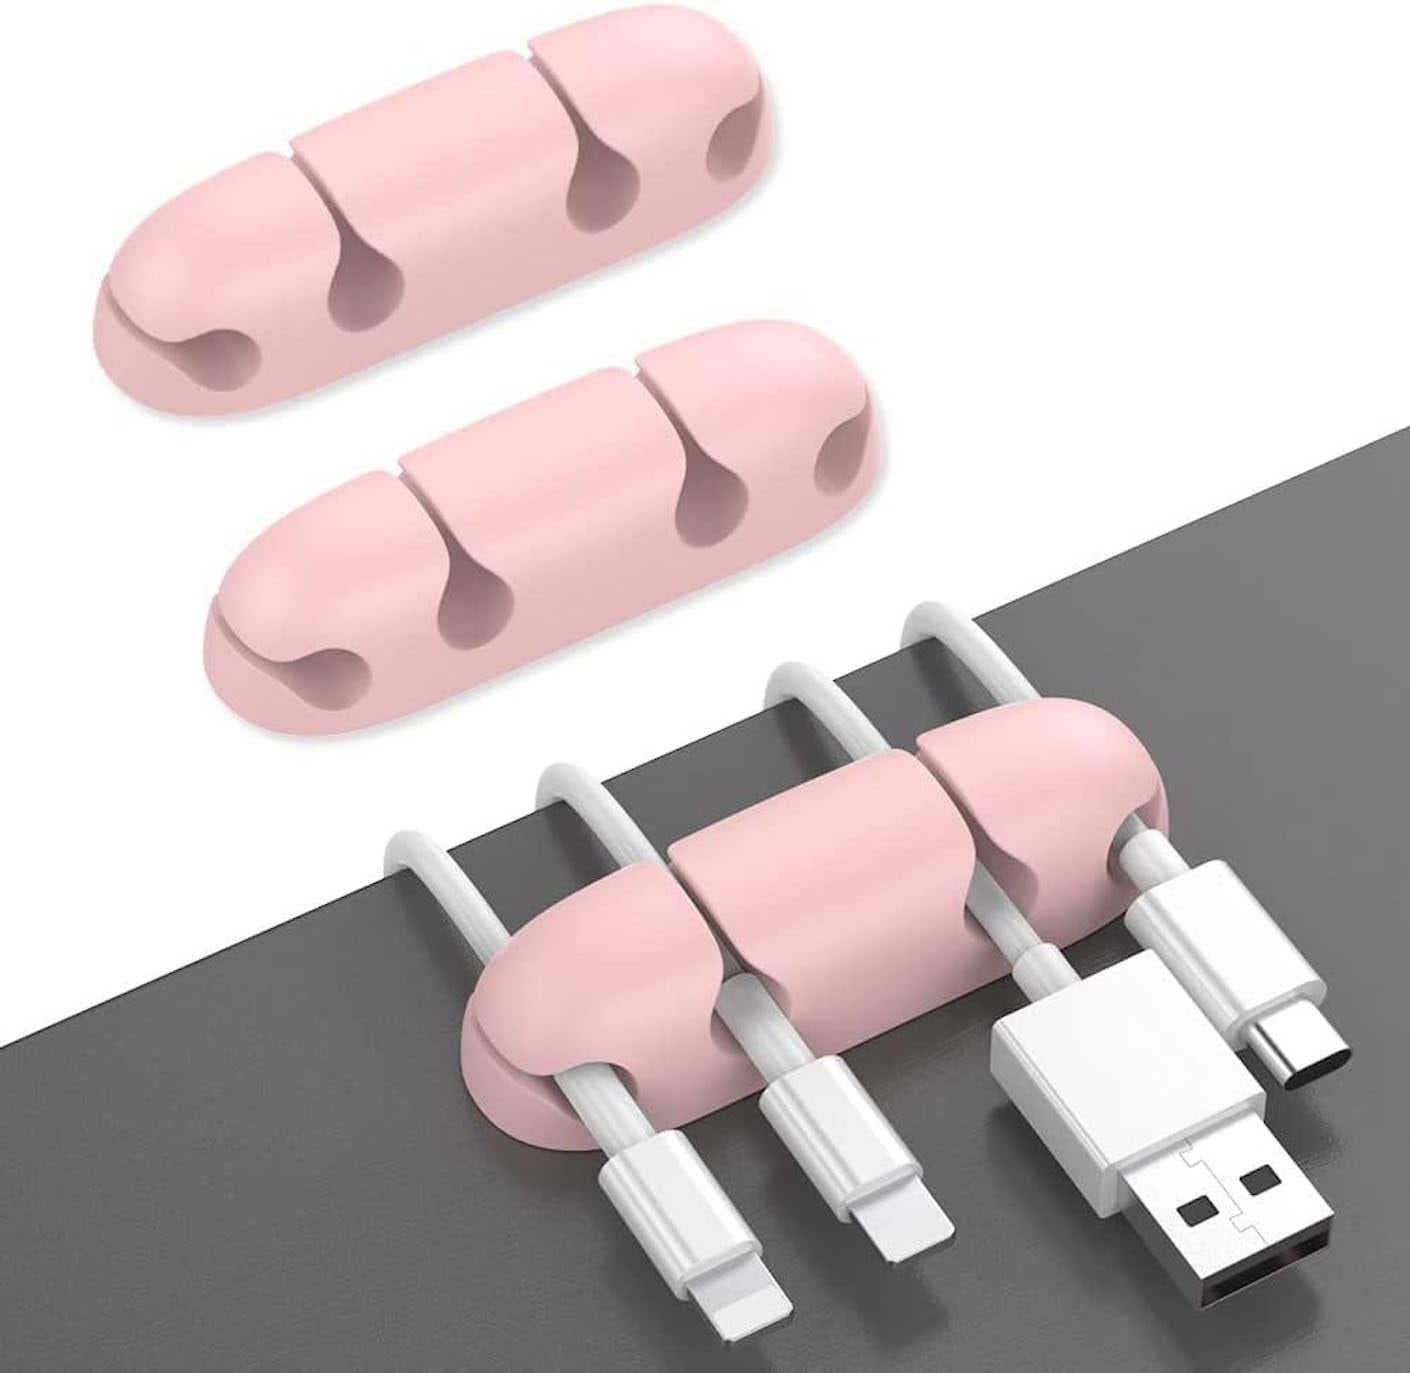 A pink cord holder separates four white cords.